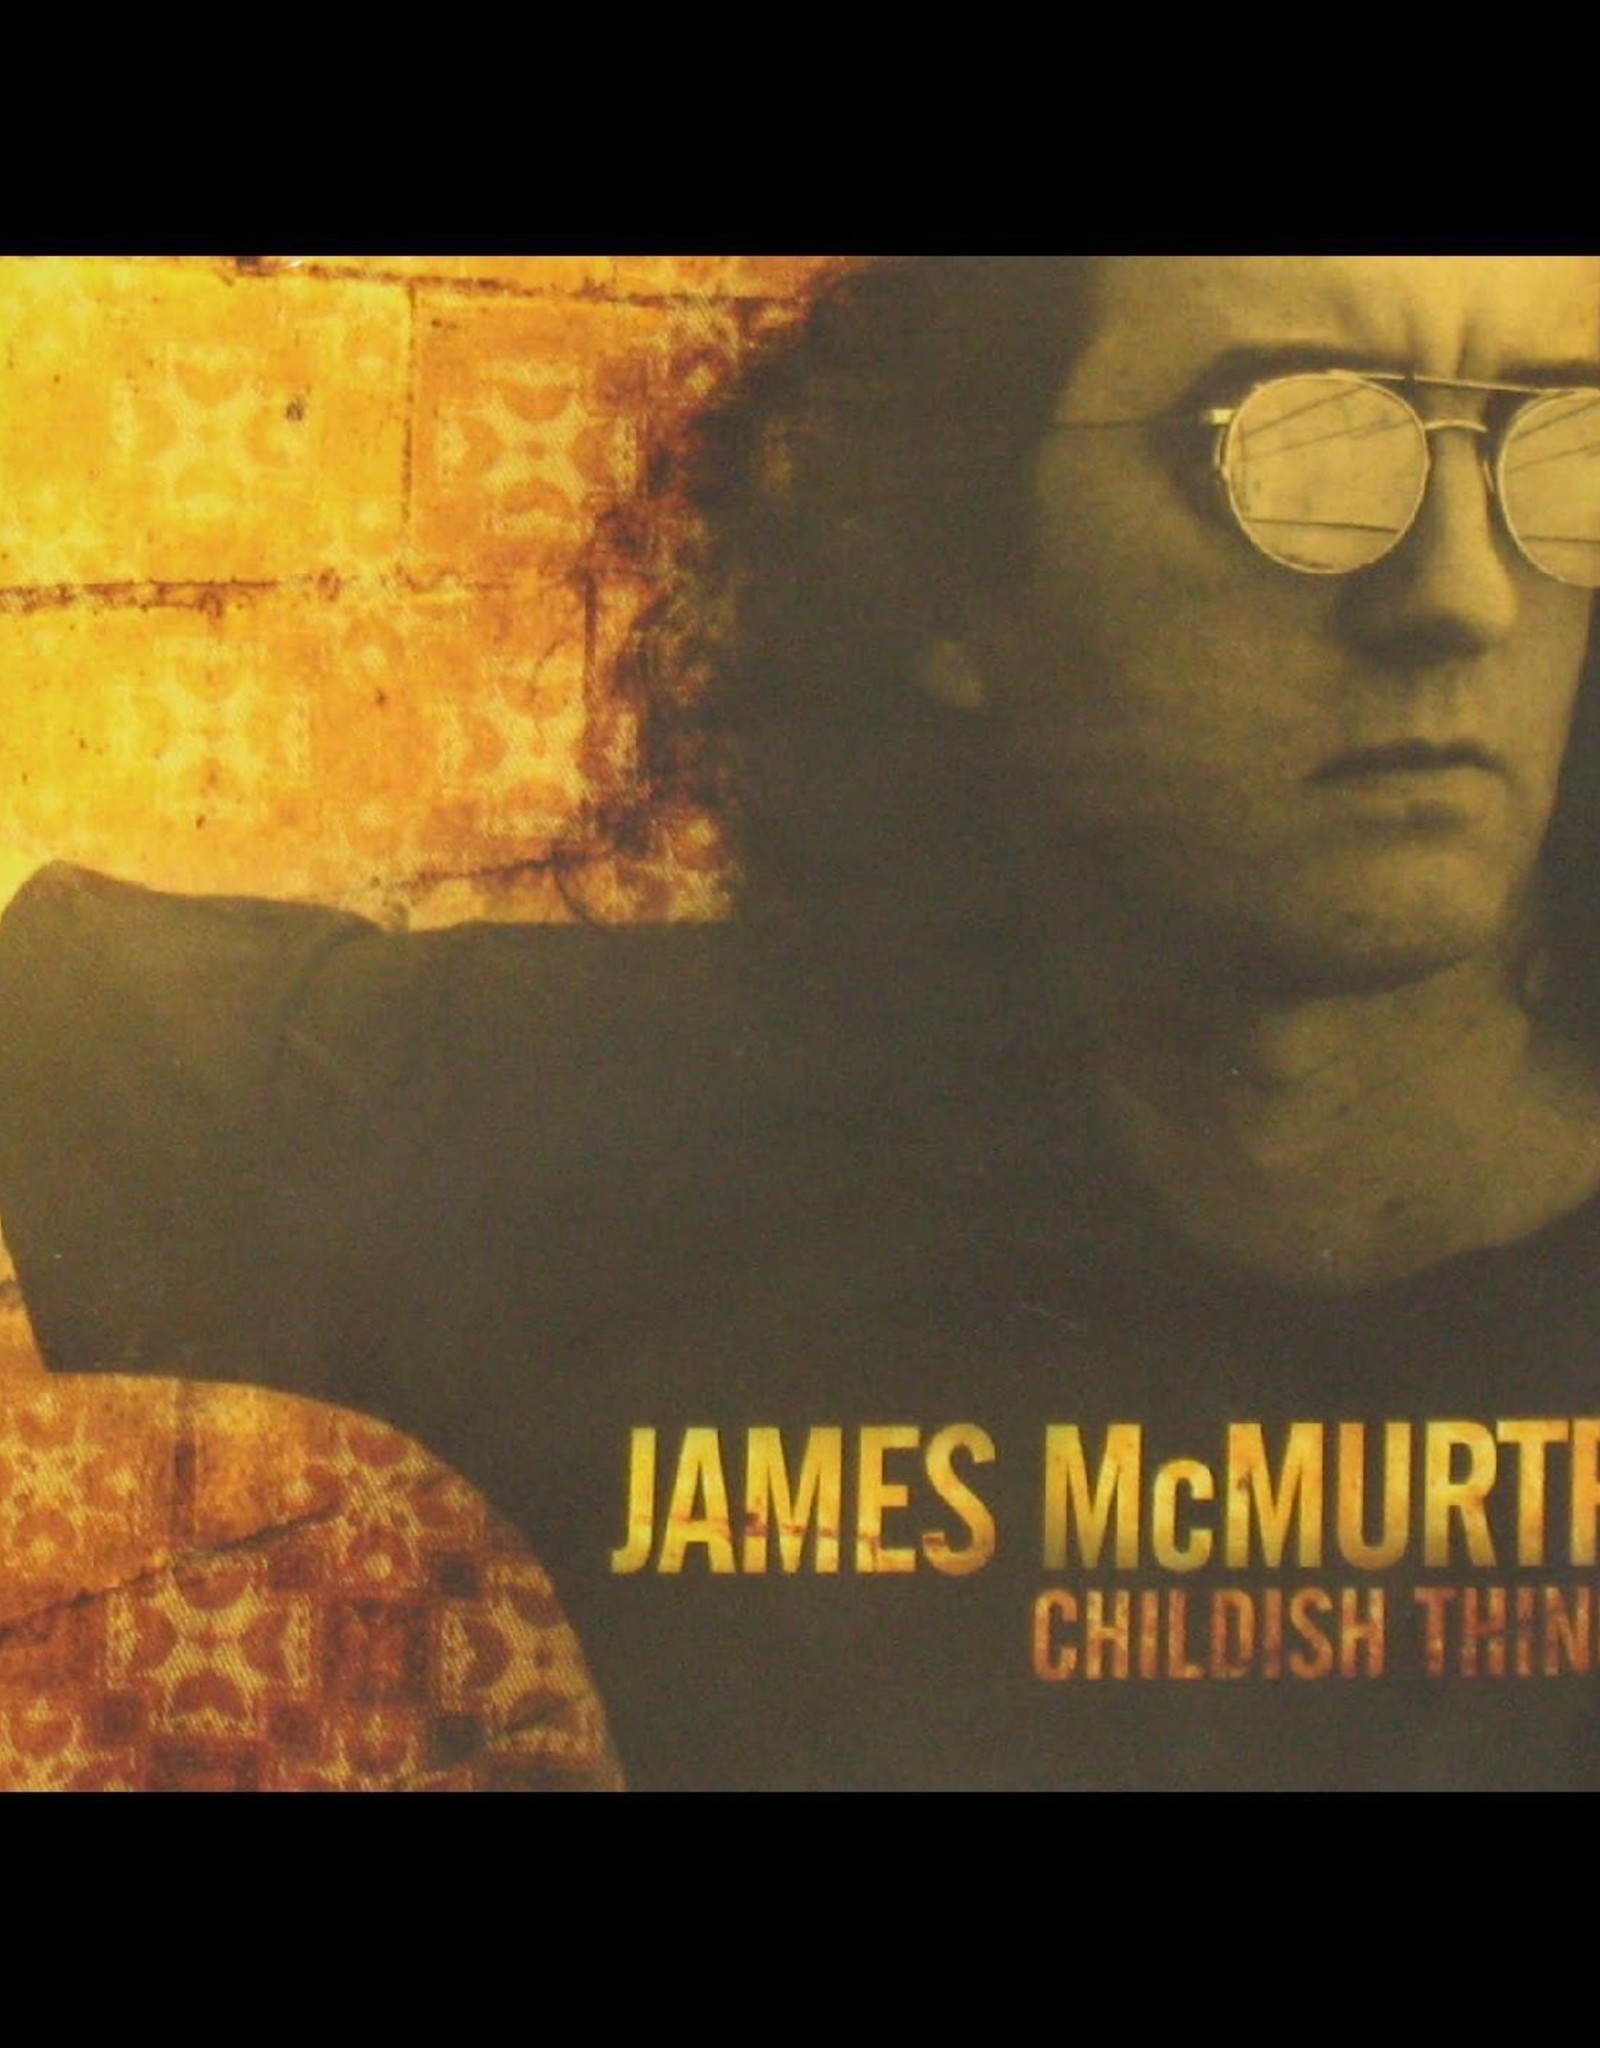 James Mcmurtry - Childish Things(RSD 2020 BF)